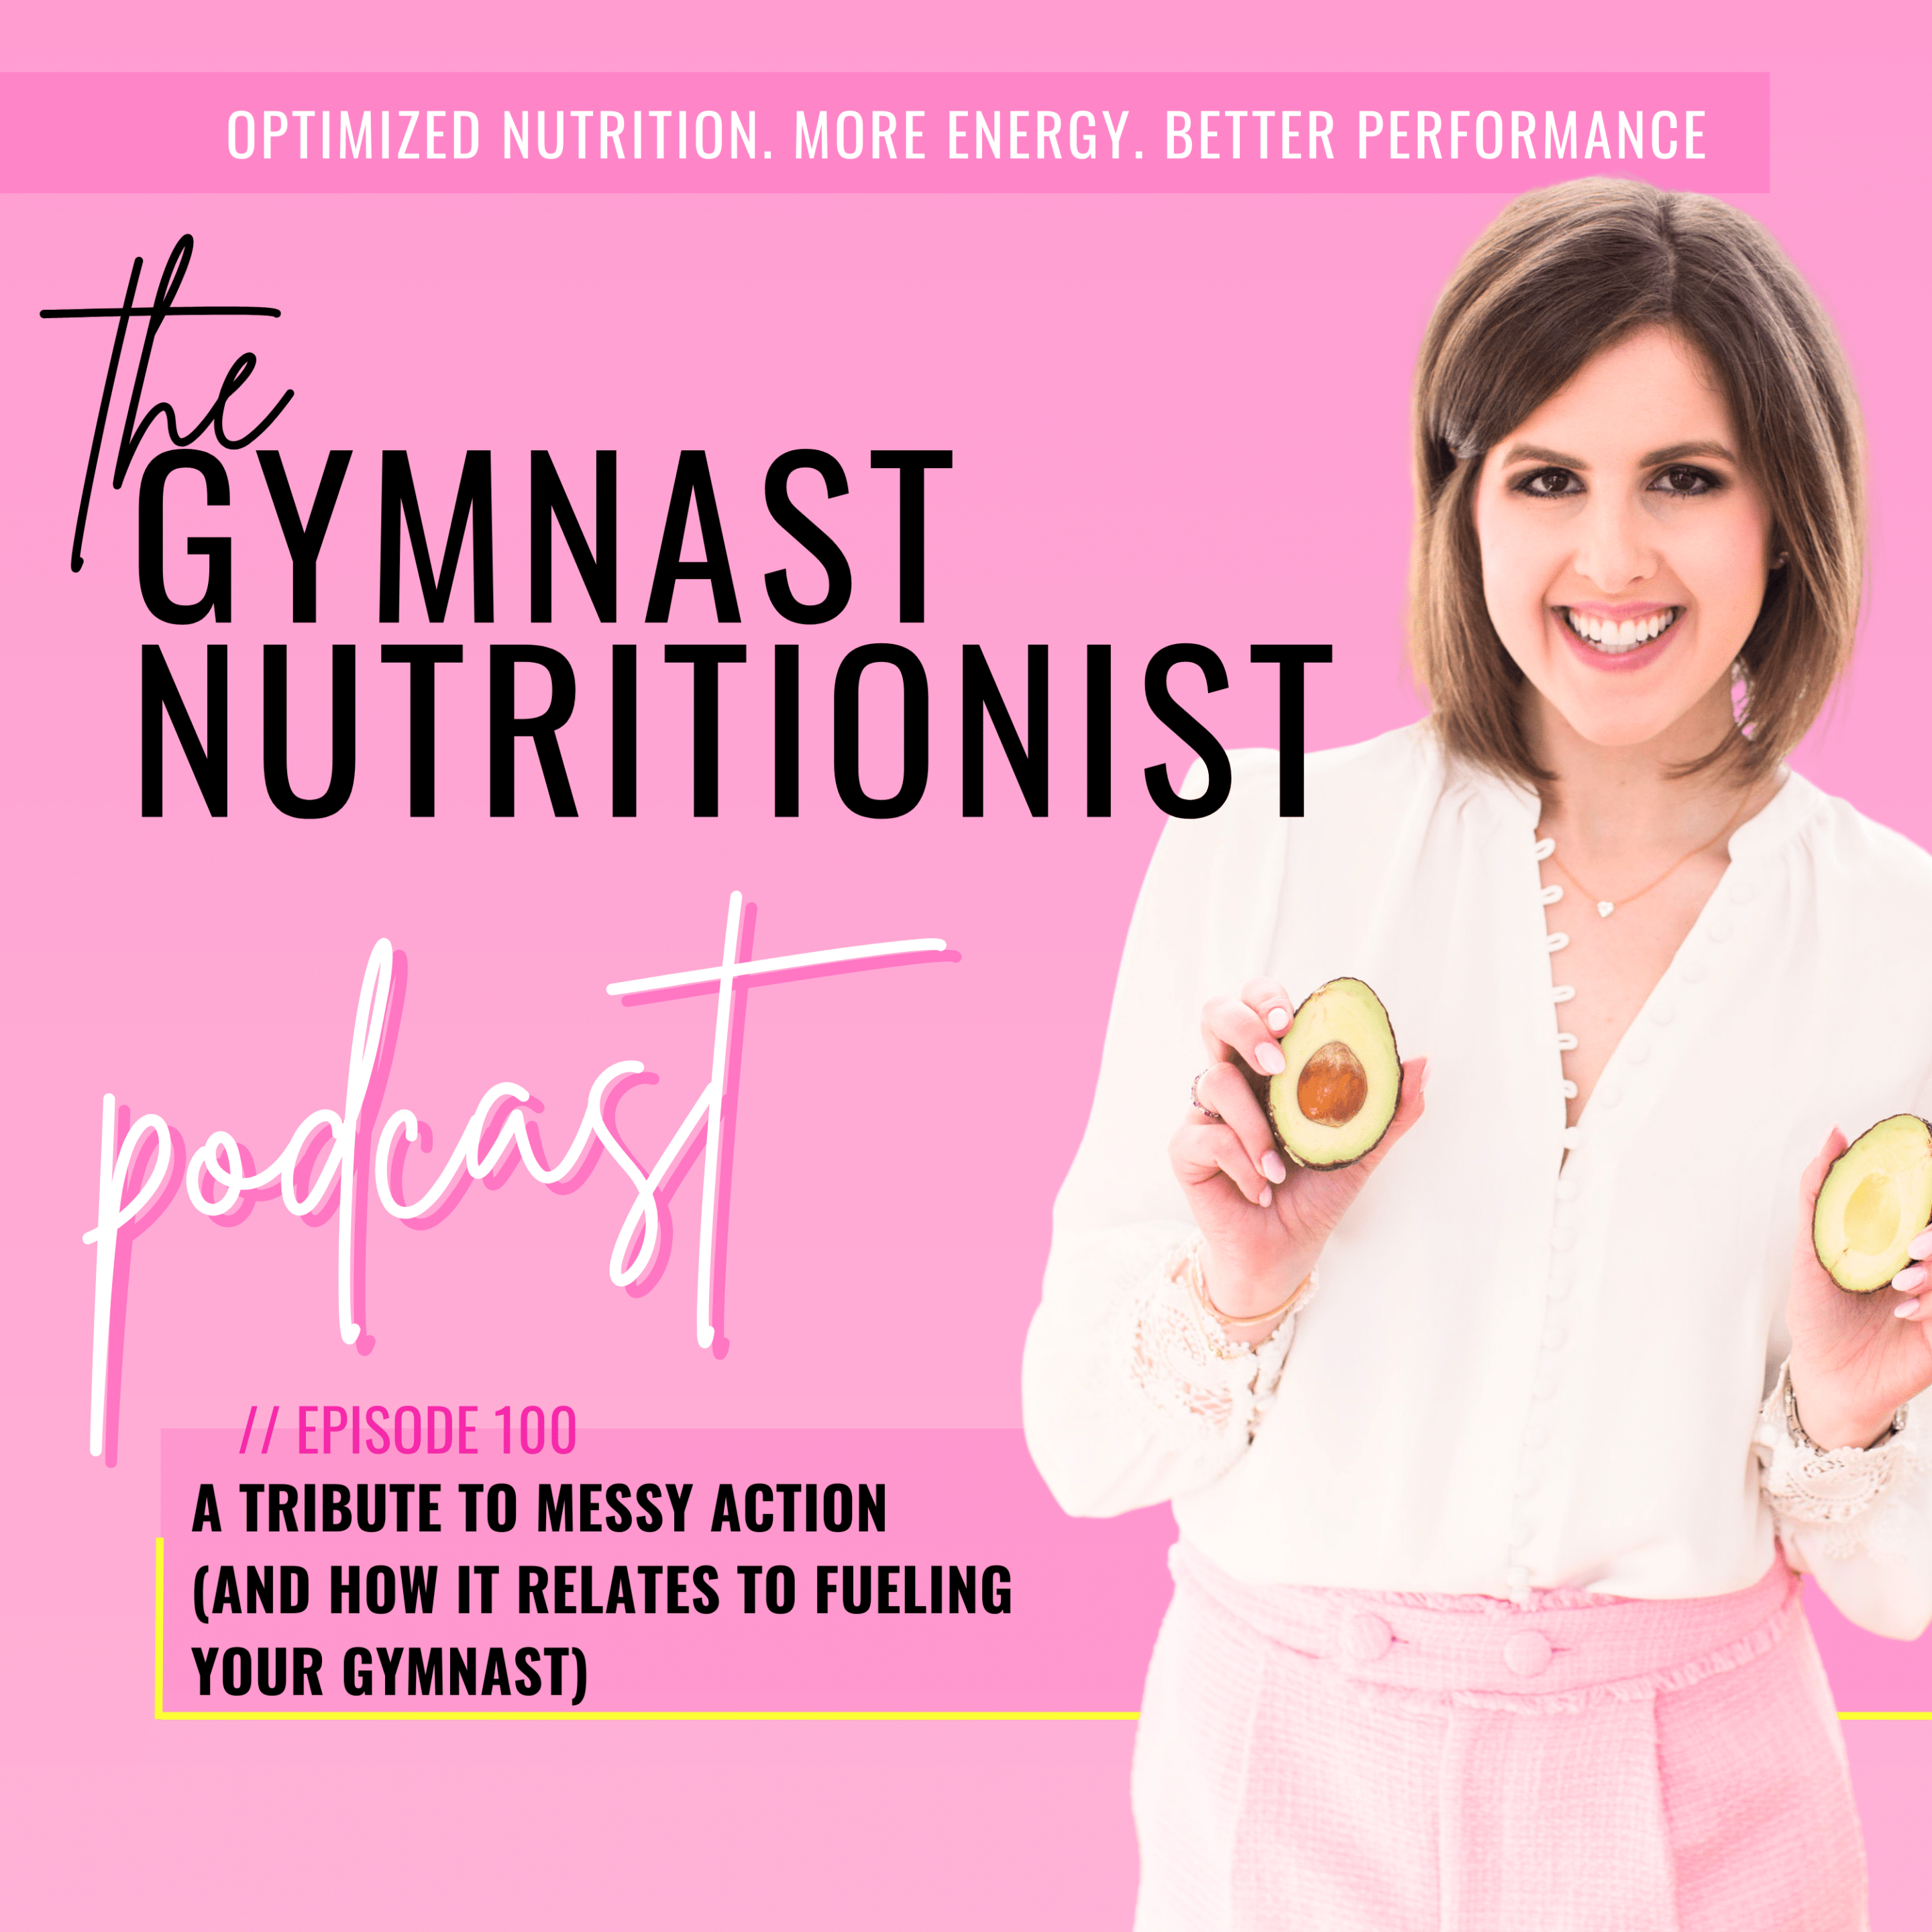 Episode 100: A tribute to messy action (and how it relates to fueling your gymnast)